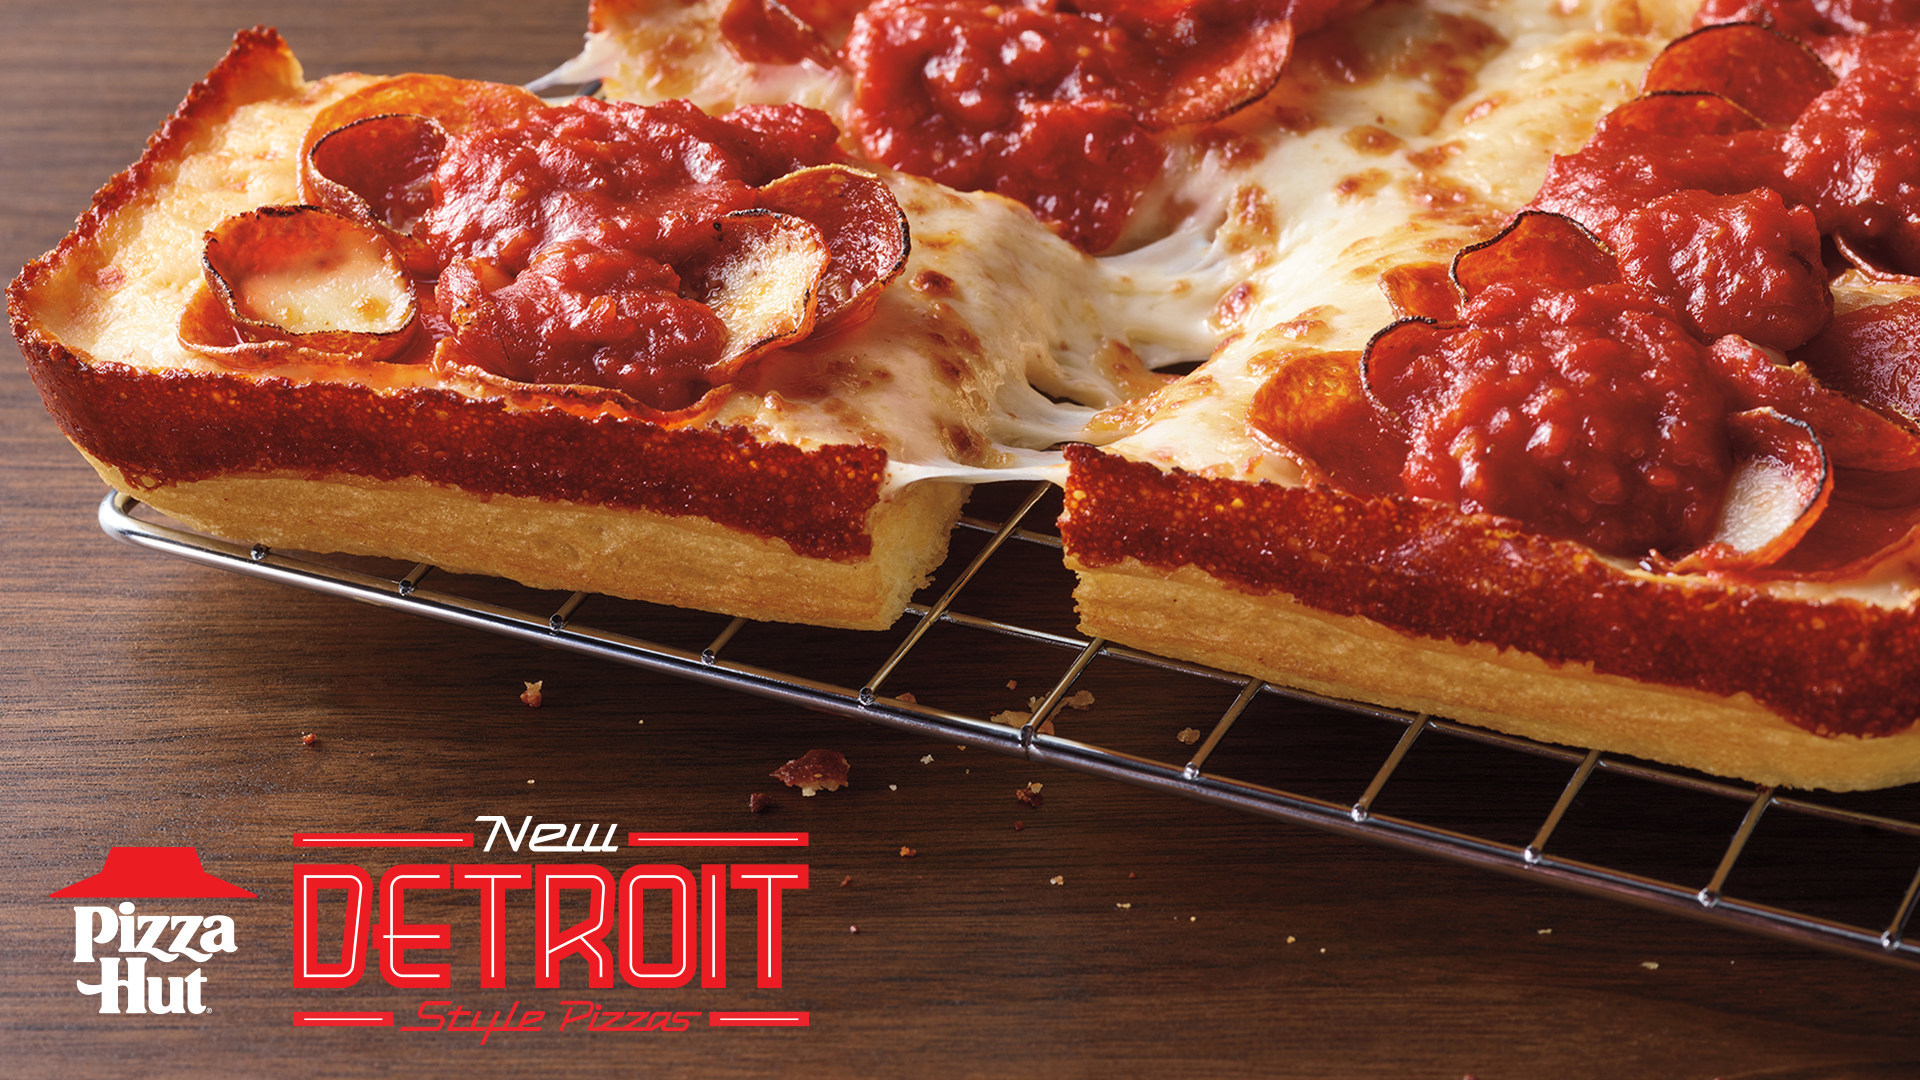 Pizza Hut Unveils New Handcrafted Detroit-Style Pizza Nationwide - Hut Life  - Official Pizza Hut Blog